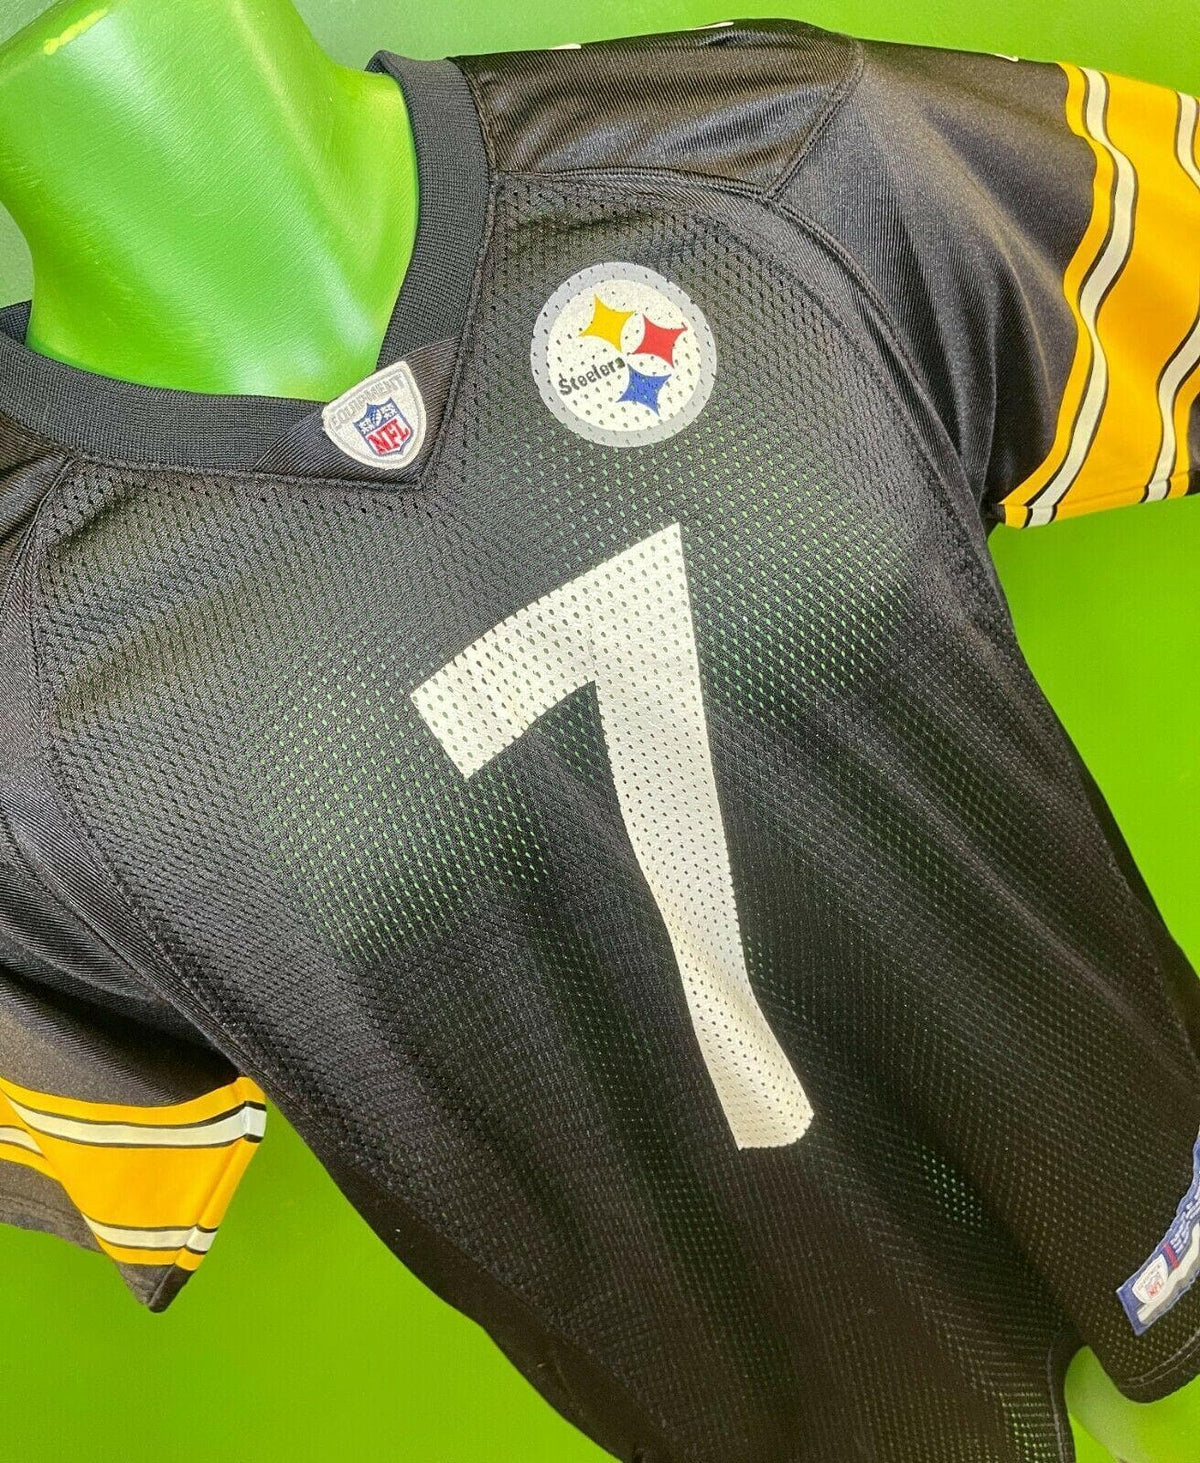 NFL Pittsburgh Steelers Roethisberger #7 Reebok Jersey Youth Large 14-16